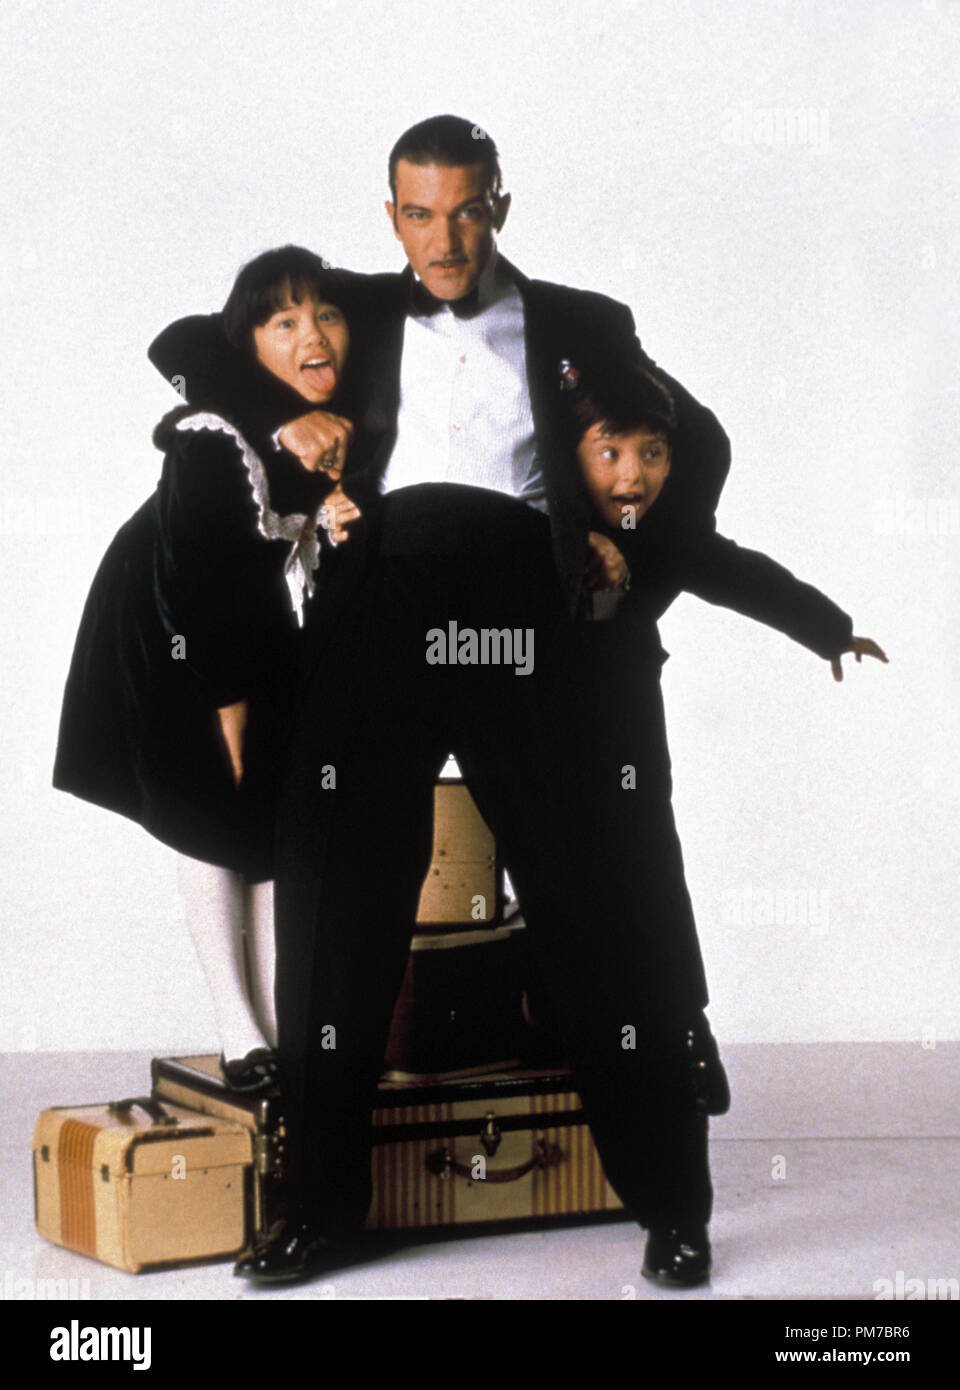 Film Still from 'Four Rooms' Lana McKissack, Antonio Banderas, Danny Verduzco © 1995 Miramax Photo Credit: Michael O'Neill  File Reference # 31043392THA  For Editorial Use Only - All Rights Reserved Stock Photo